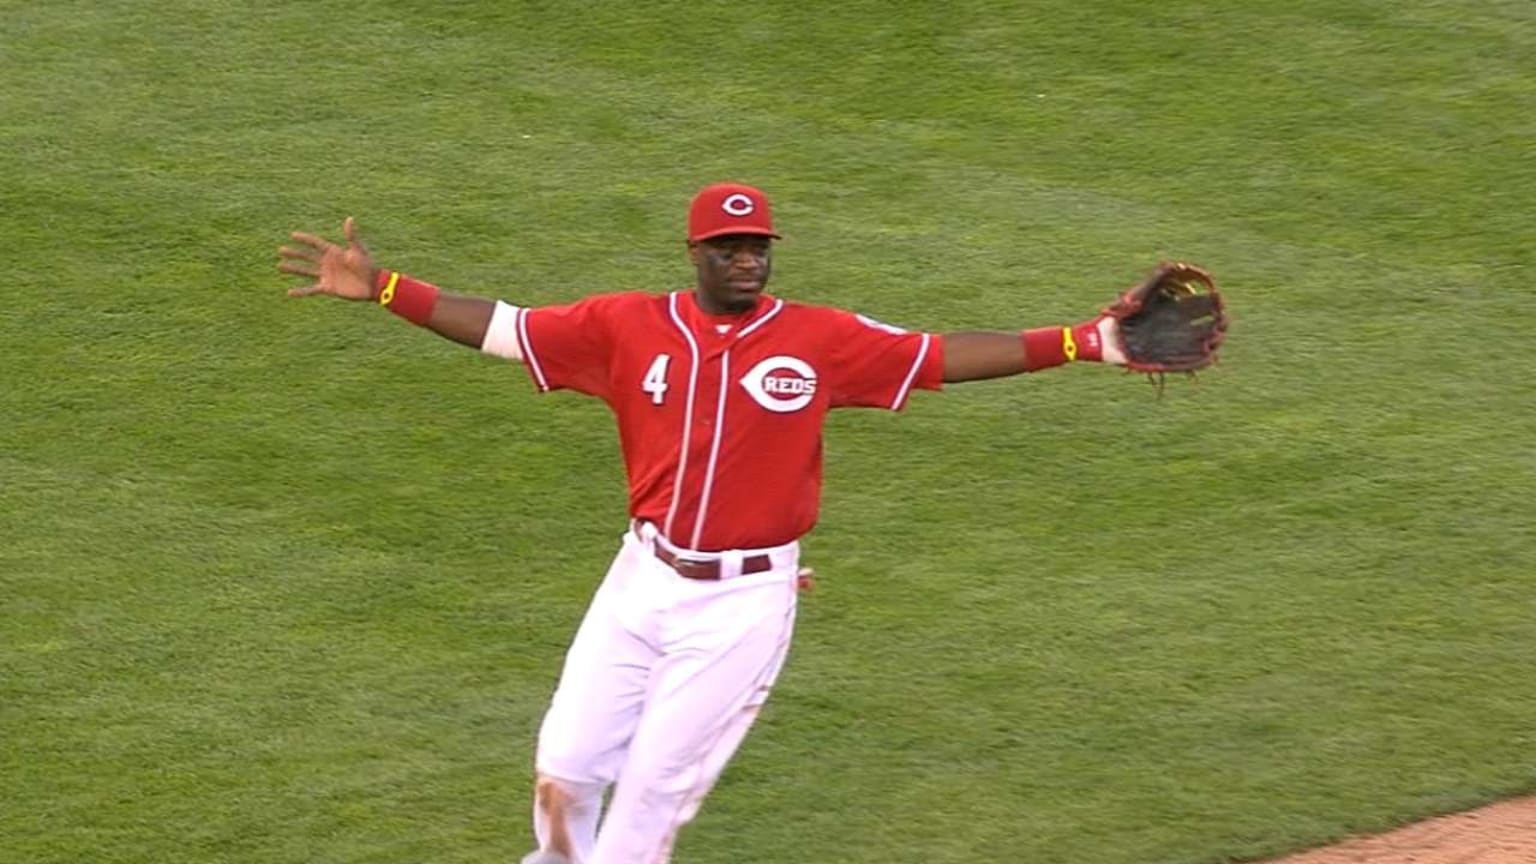 Reds' Brandon Phillips does Baseball is Better campaign